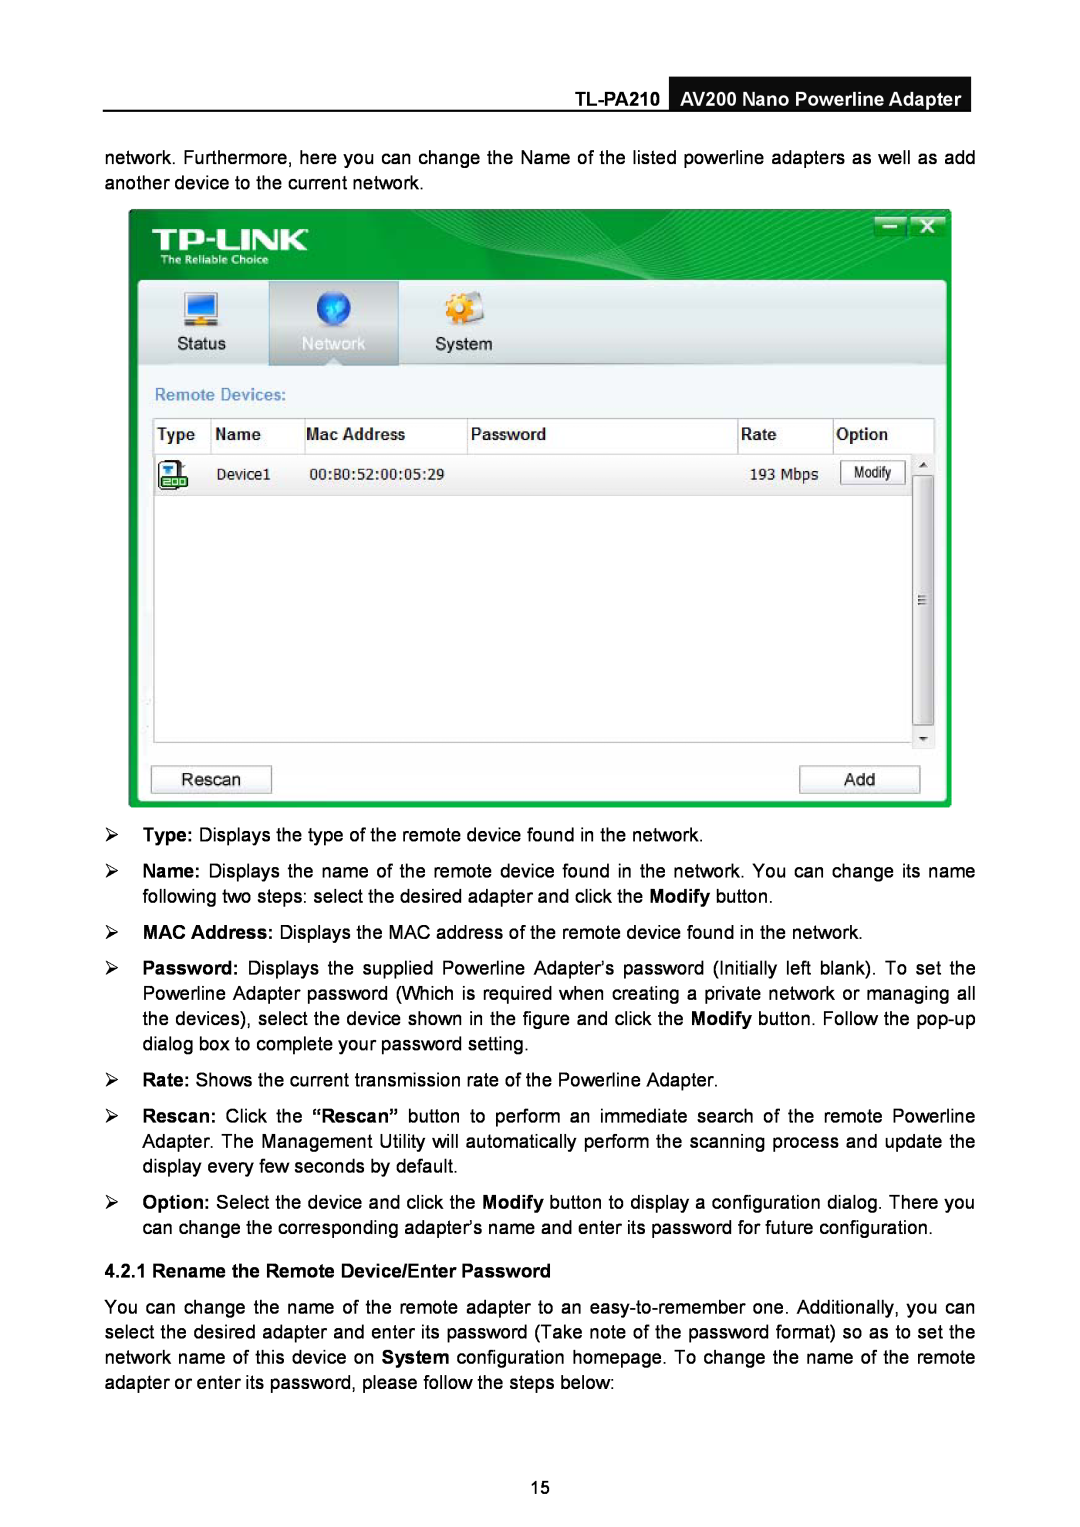 TP-Link manual Rename the Remote Device/Enter Password, TL-PA210 AV200 Nano Powerline Adapter 